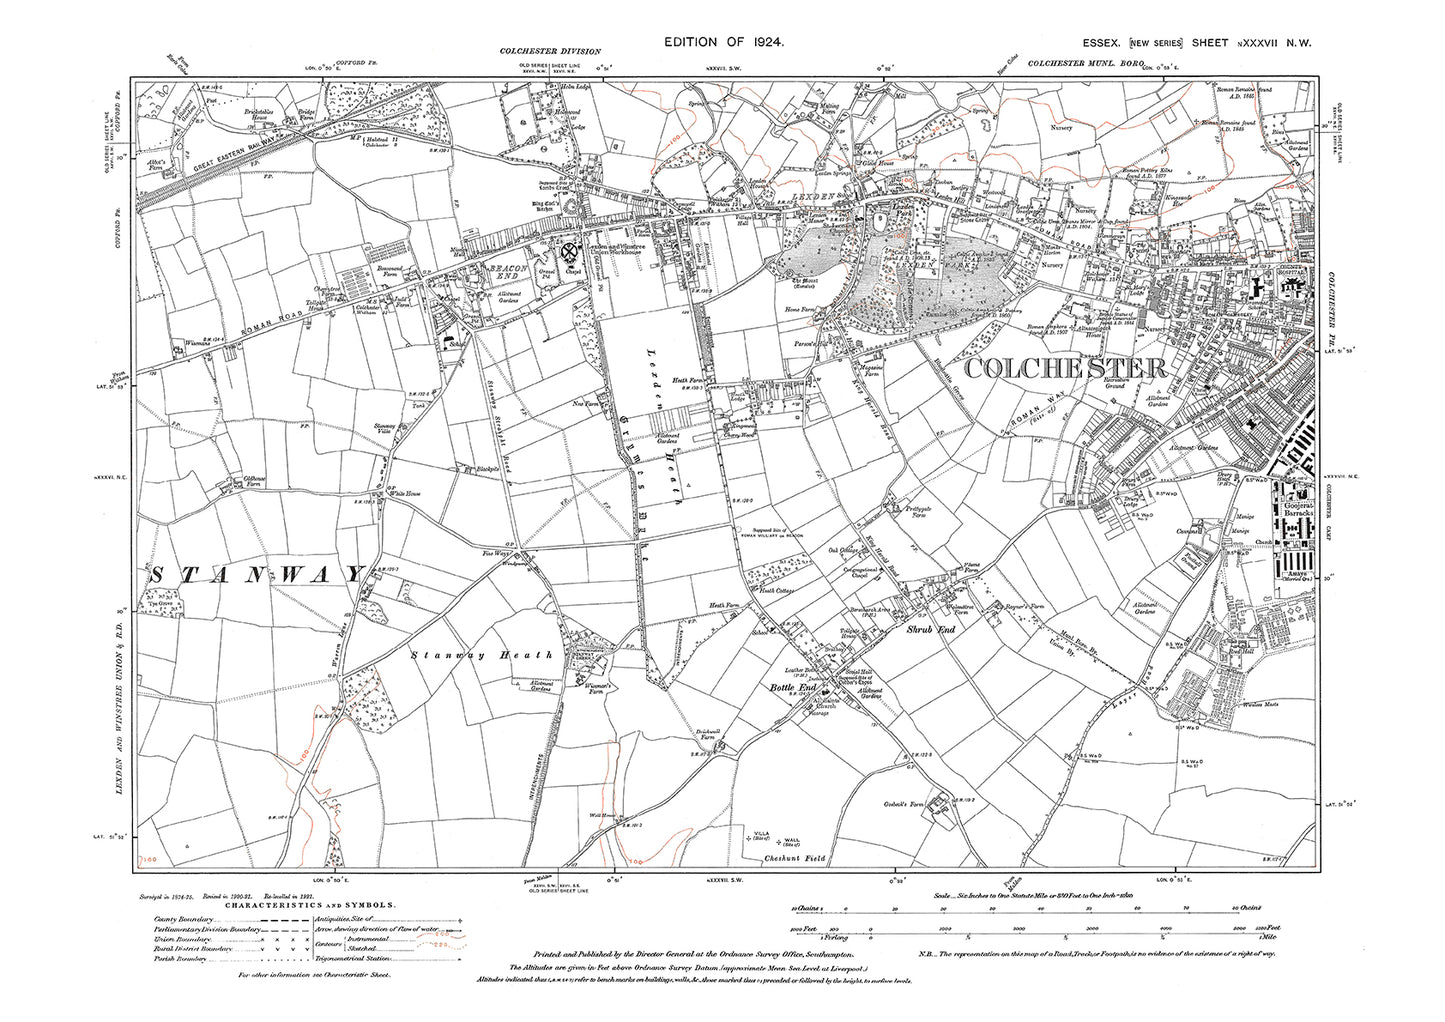 Old OS map dated 1924, showing Colchester(west) in Essex - 37NW